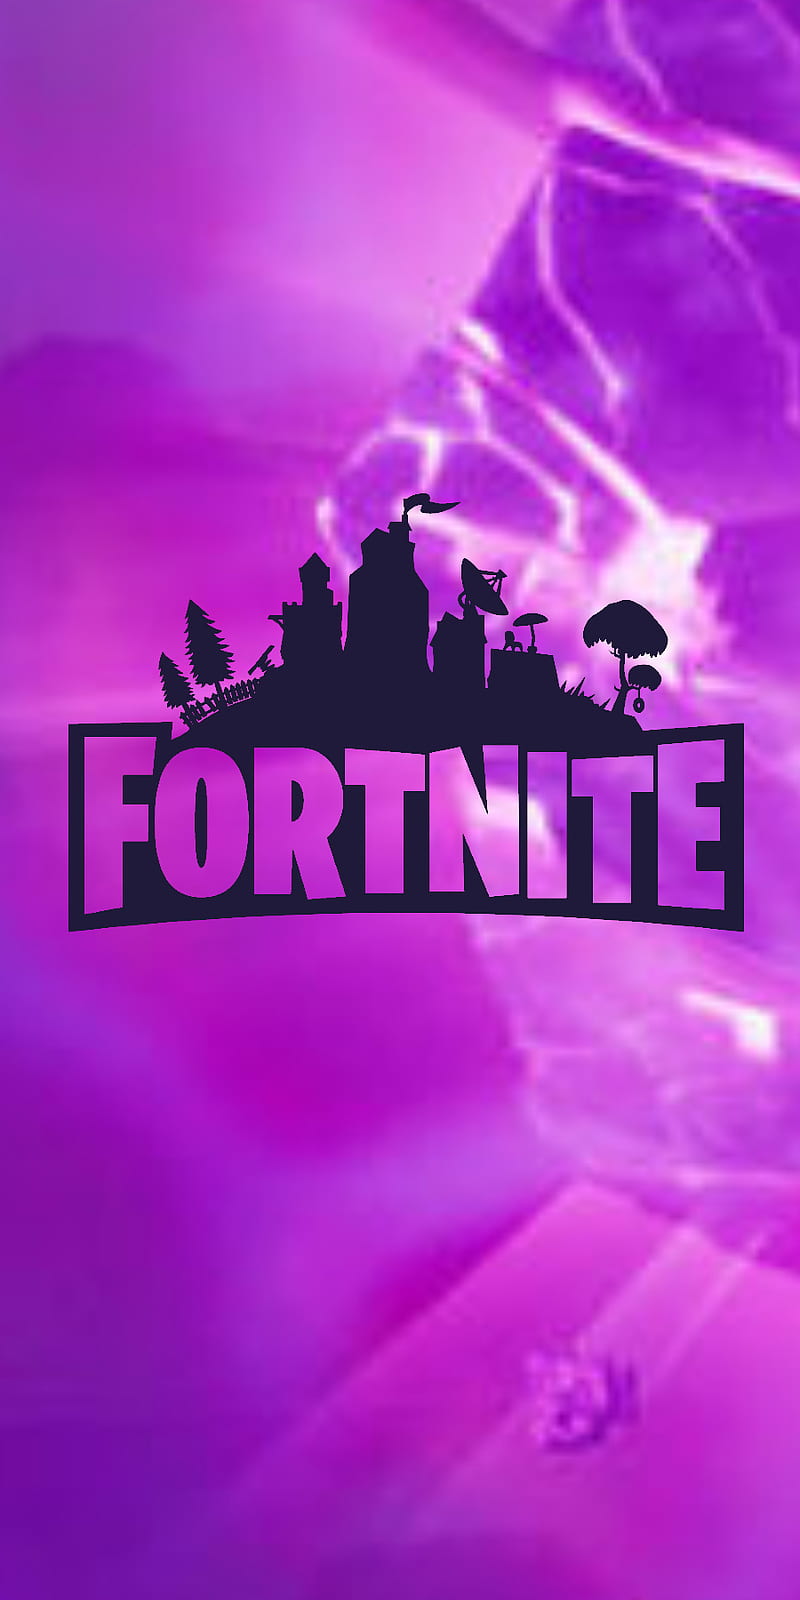 Fortnite Event, game, battle royale, cube, guns, kevin, explosion, purple, special, HD phone wallpaper